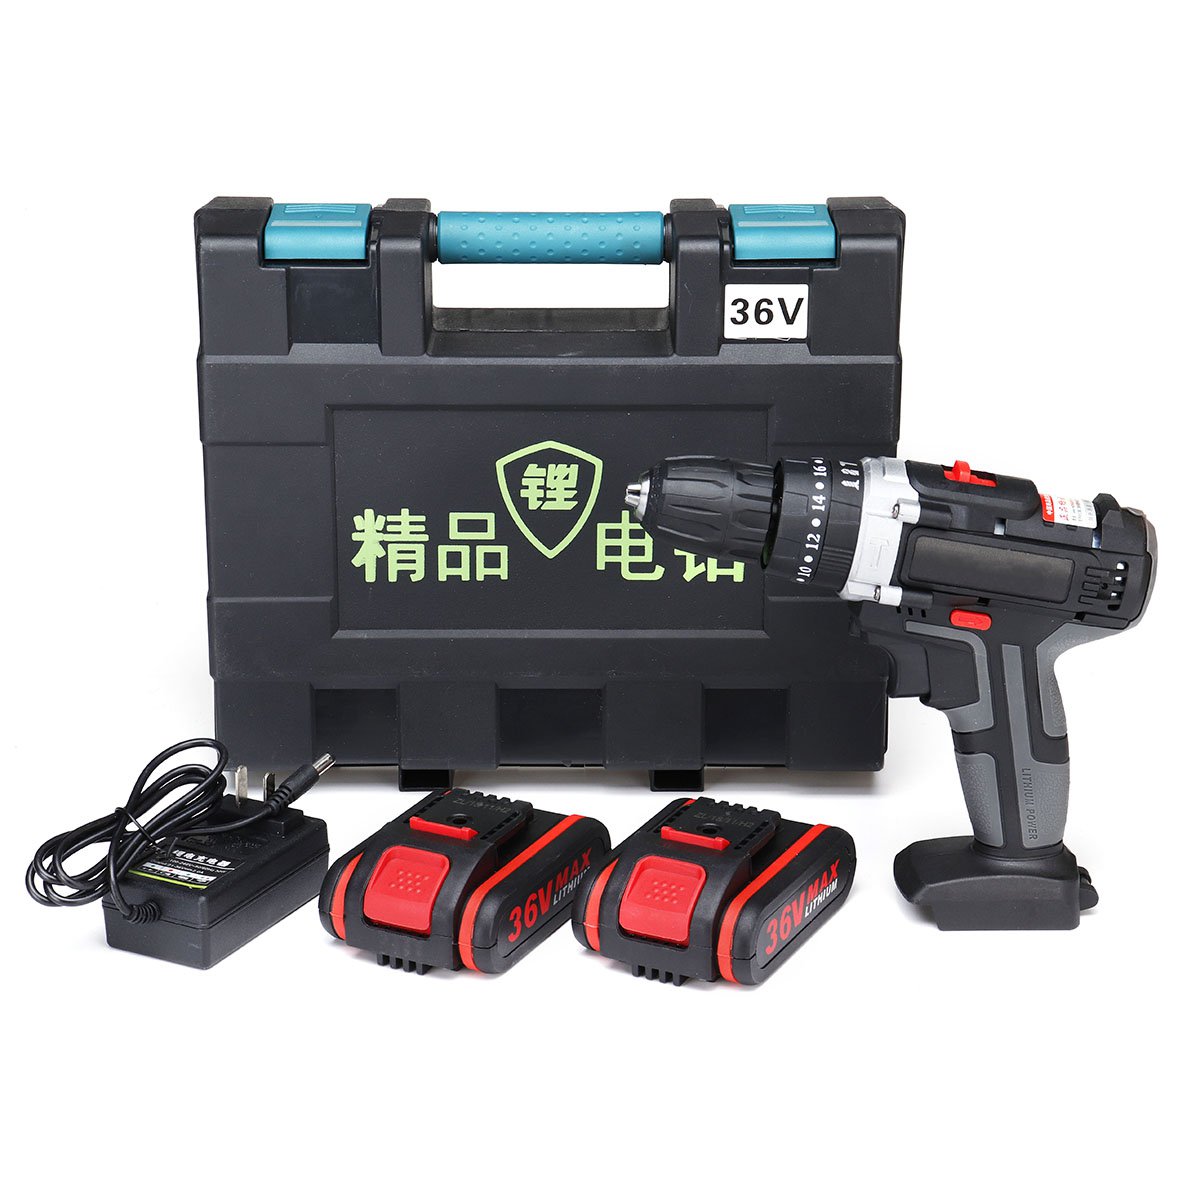 36V-Cordless-Lithium-Electric-Drill-Impact-Power-Drills-28Nm-3000mAh-183-Torque-Stage-Drill-Tools-1404353-9